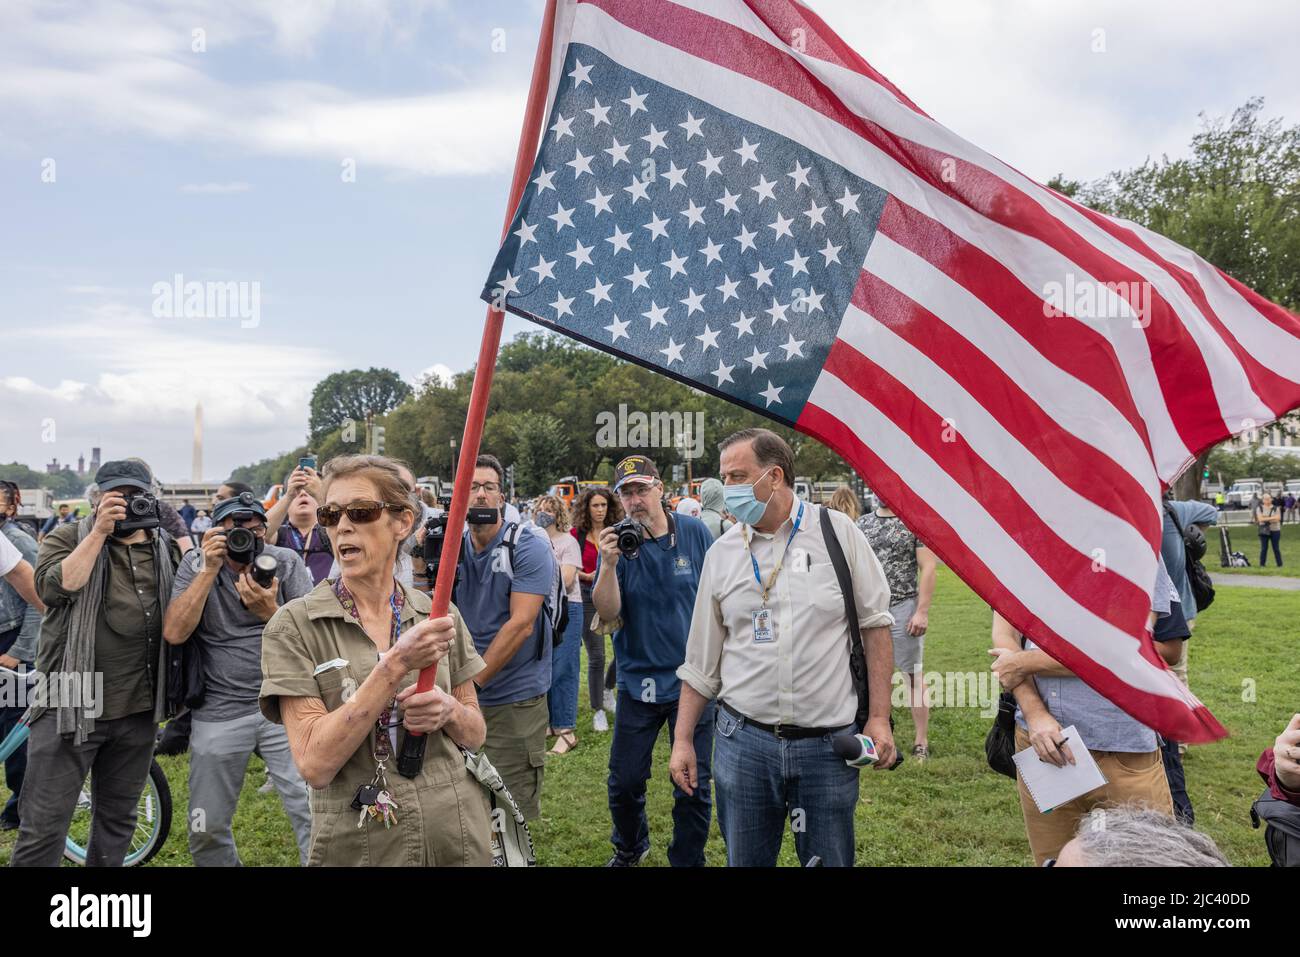 WASHINGTON, D.C. – September 18, 2021: A demonstrator waves a flag near members of the media before a “Justice for J6” rally. Stock Photo